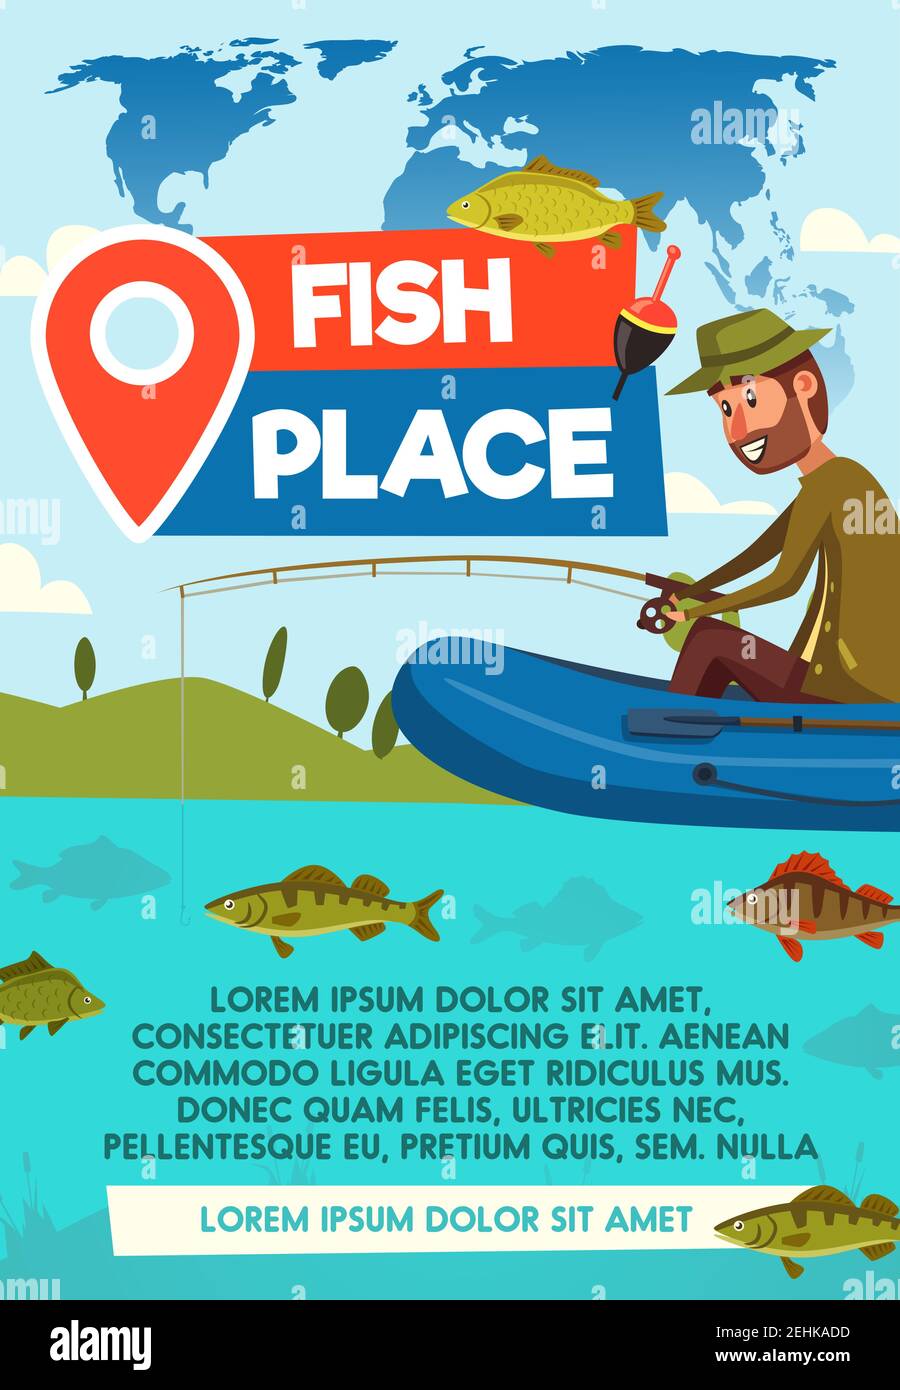 https://c8.alamy.com/comp/2EHKADD/fish-place-cartoon-poster-for-fishing-advertisement-with-location-pin-vector-design-of-fisherman-in-hat-on-rubber-boat-with-rod-catching-fish-in-rive-2EHKADD.jpg